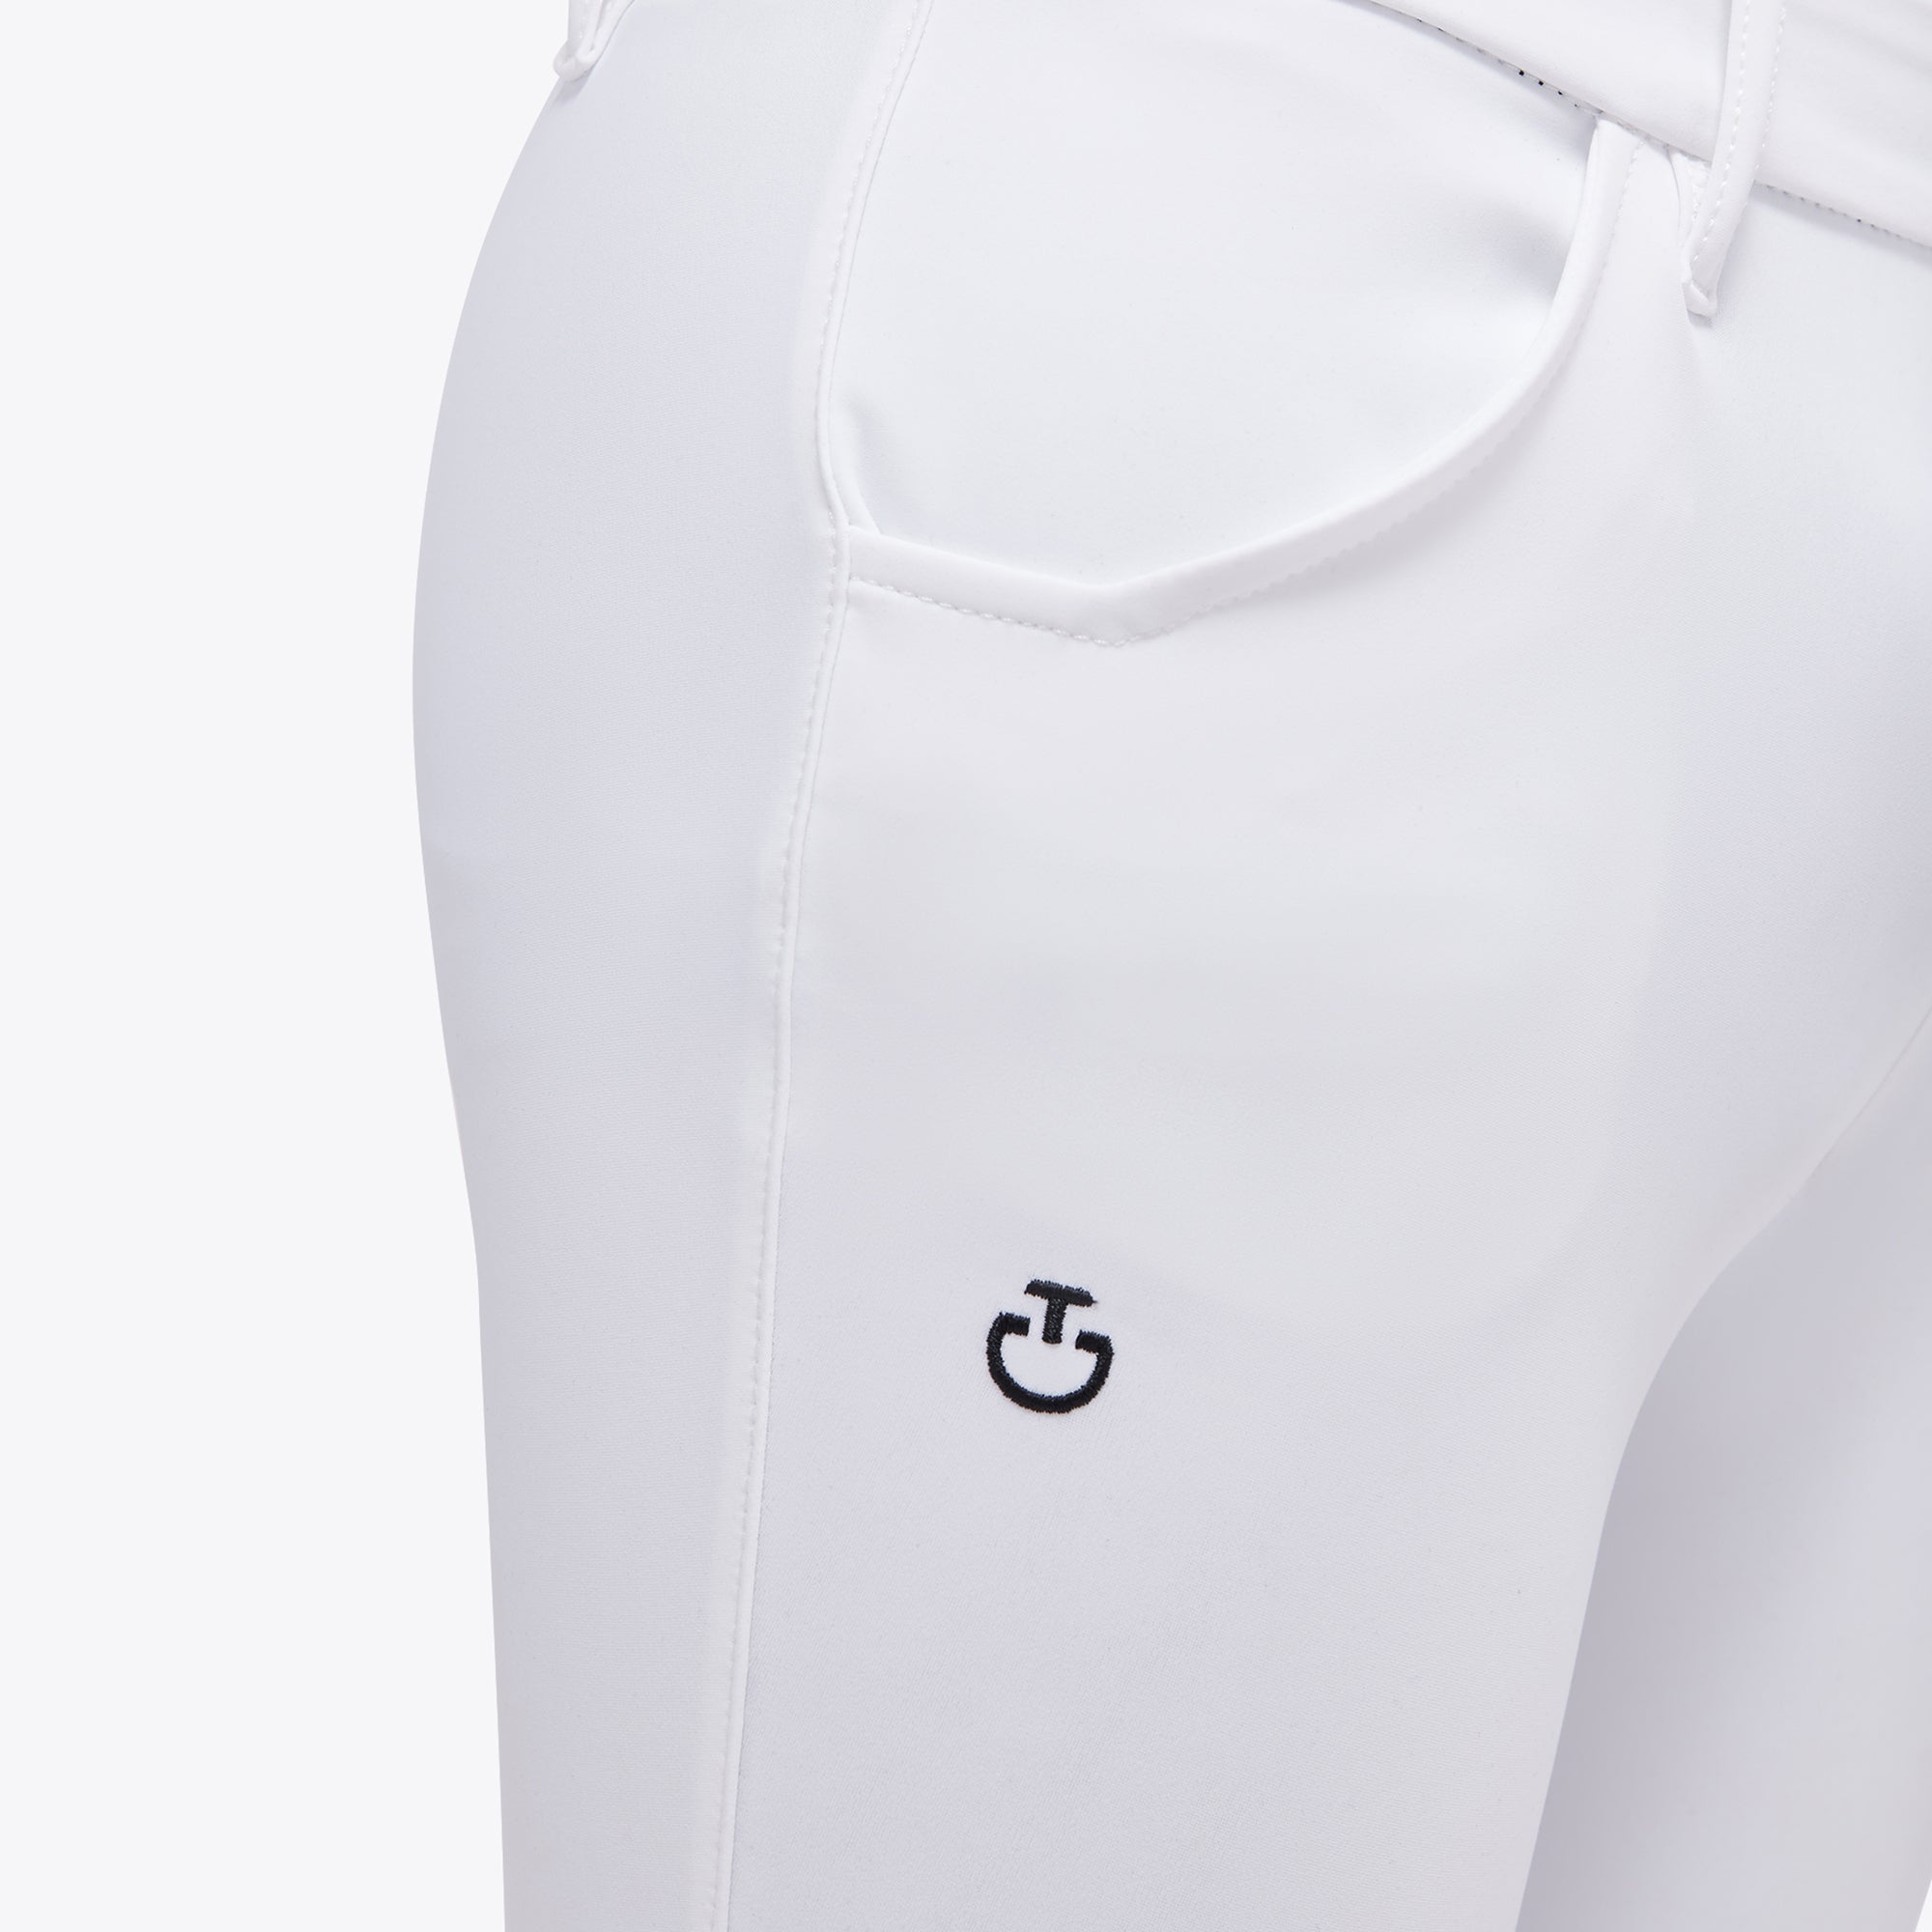 Young Riders CT Unisex Riding Breeches - White